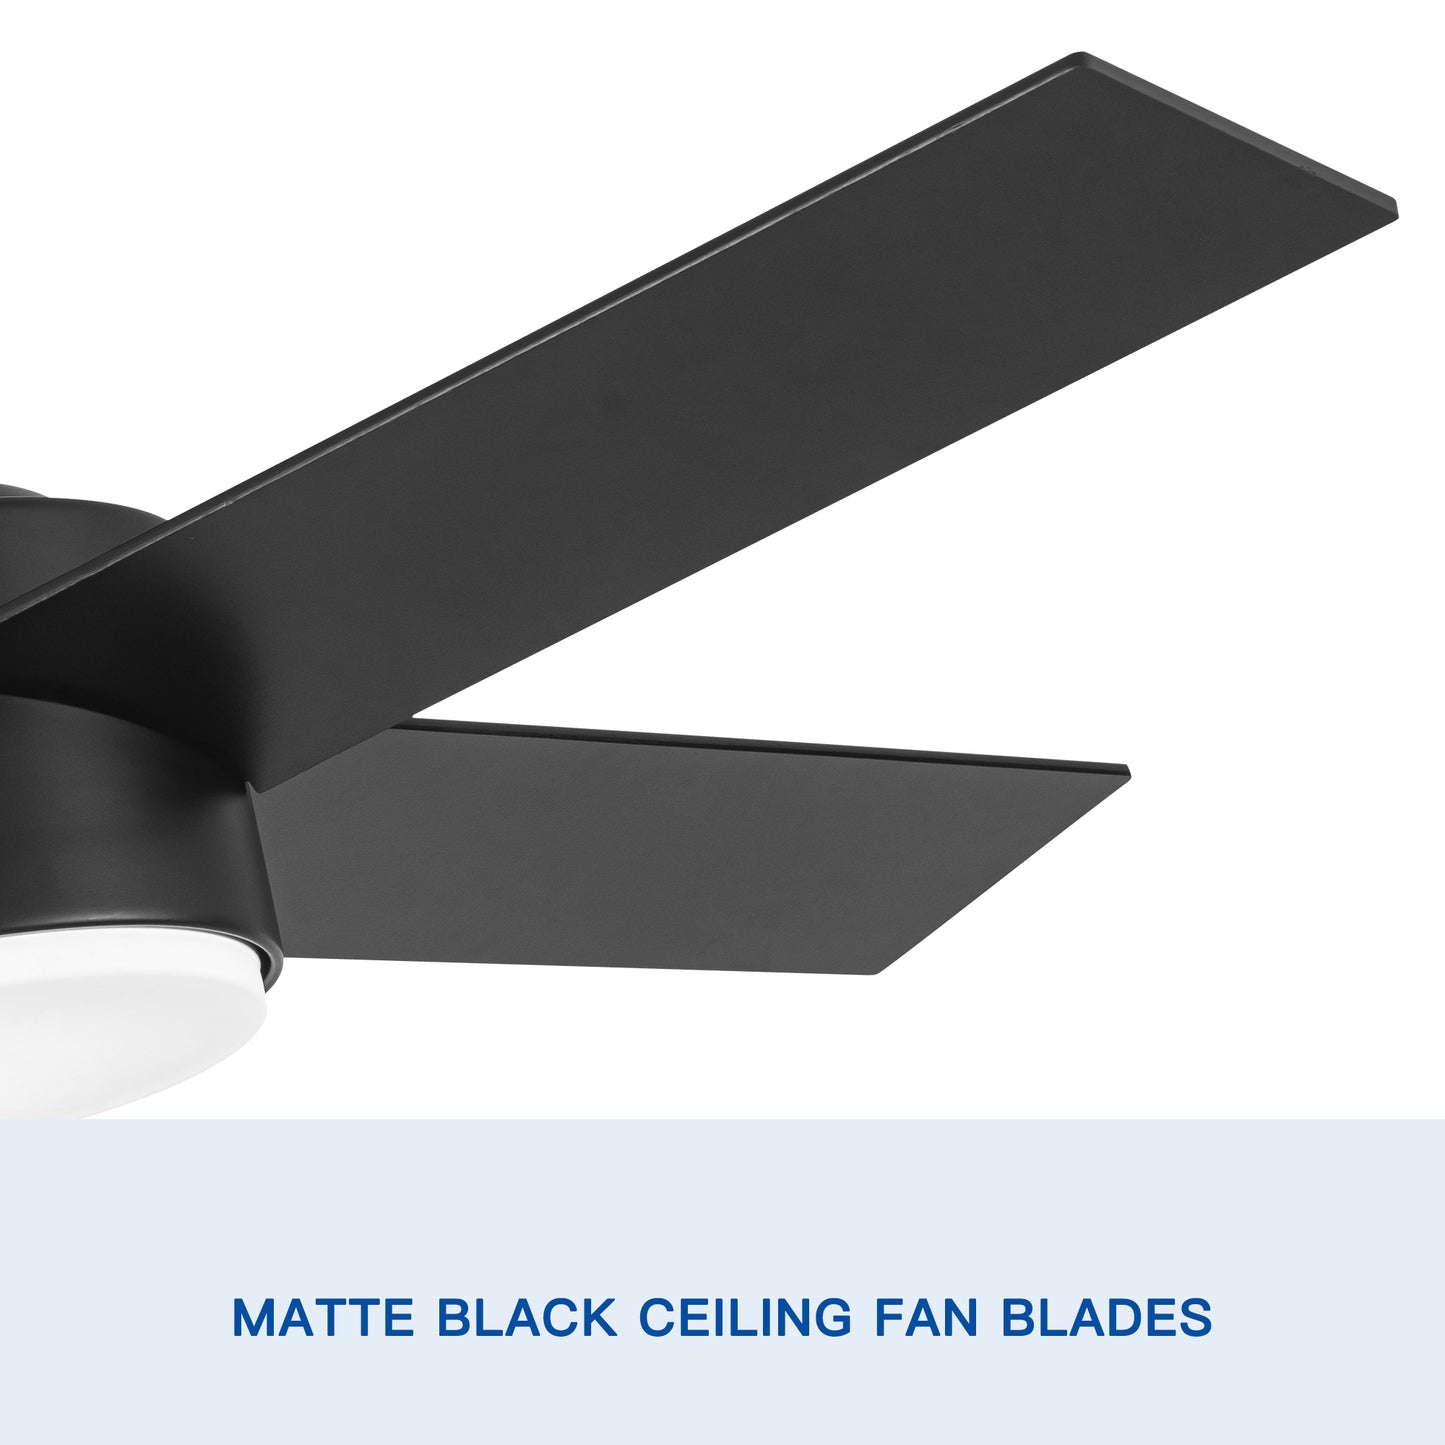 YUHAO 44 Inch LED Ceiling Fan with Black ABS Blade